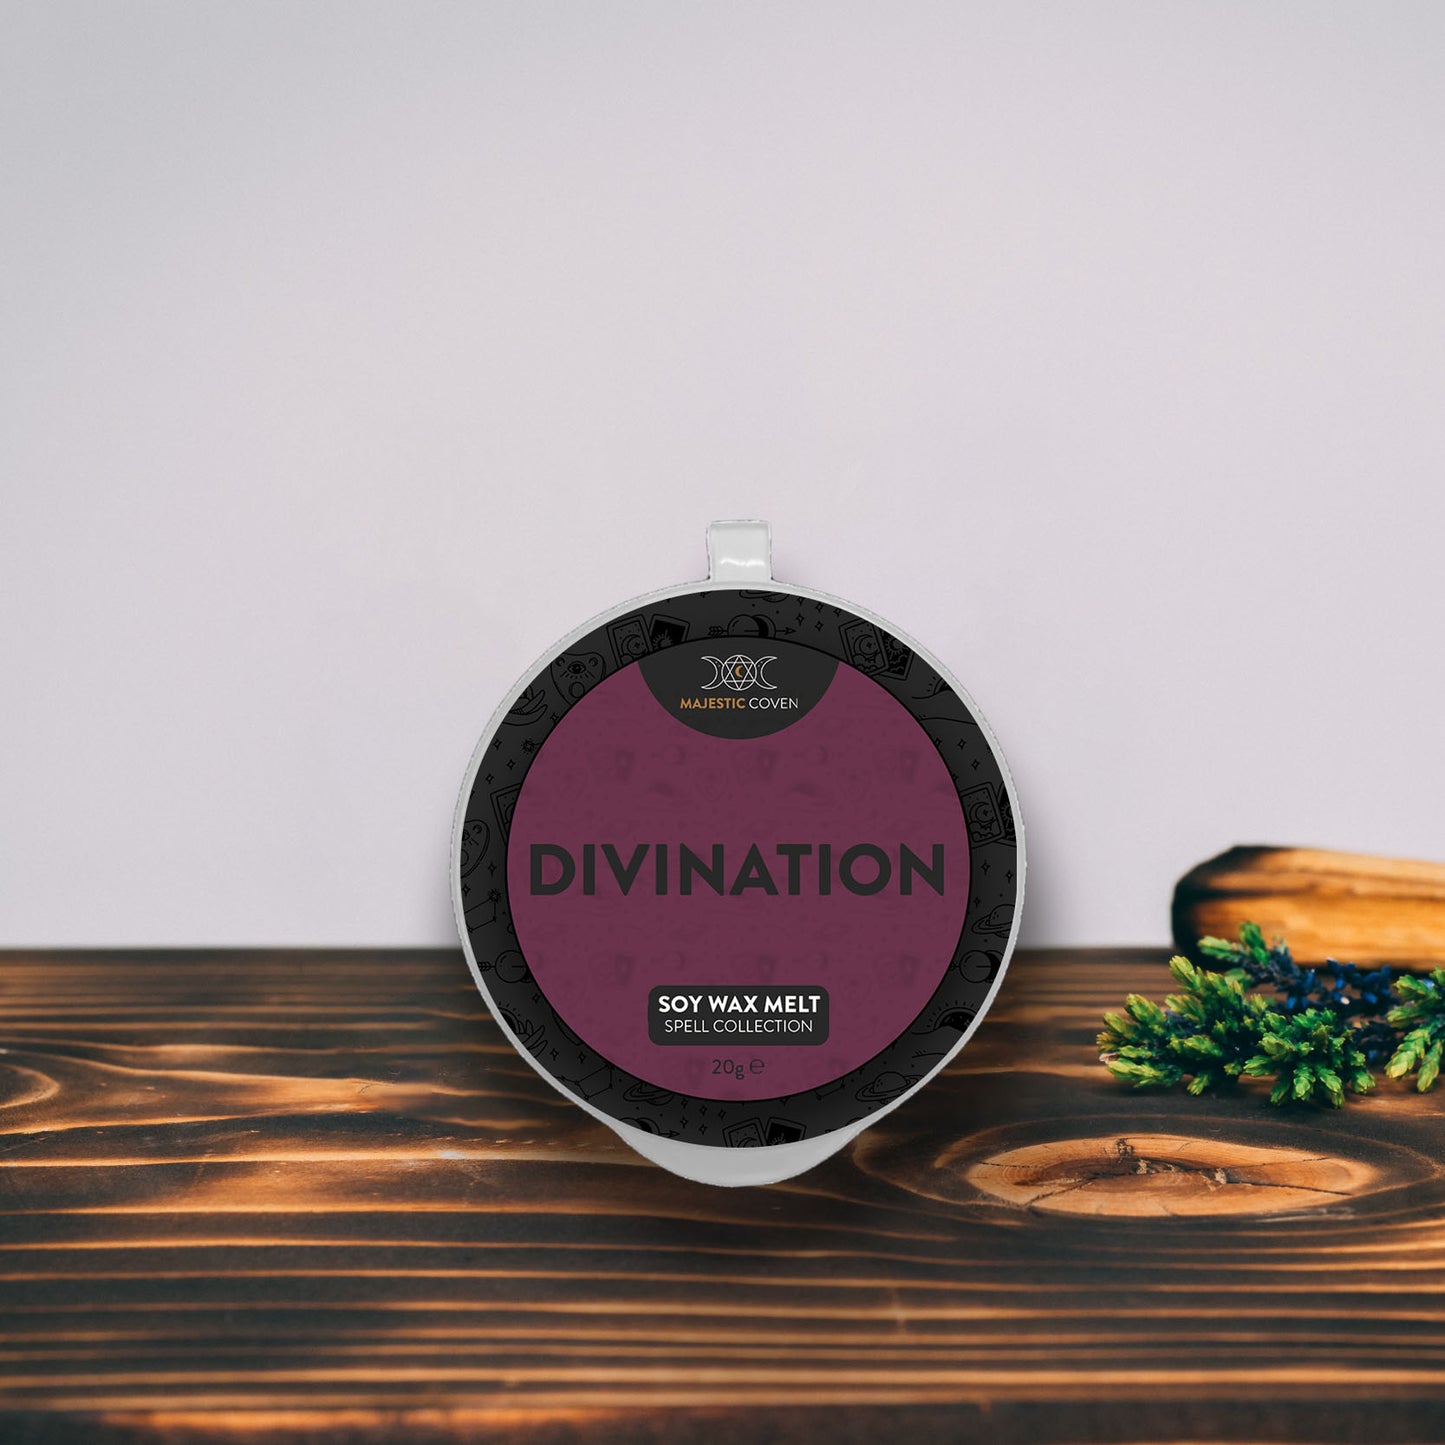 Divination - Soy Wax Melt Majestic Coven